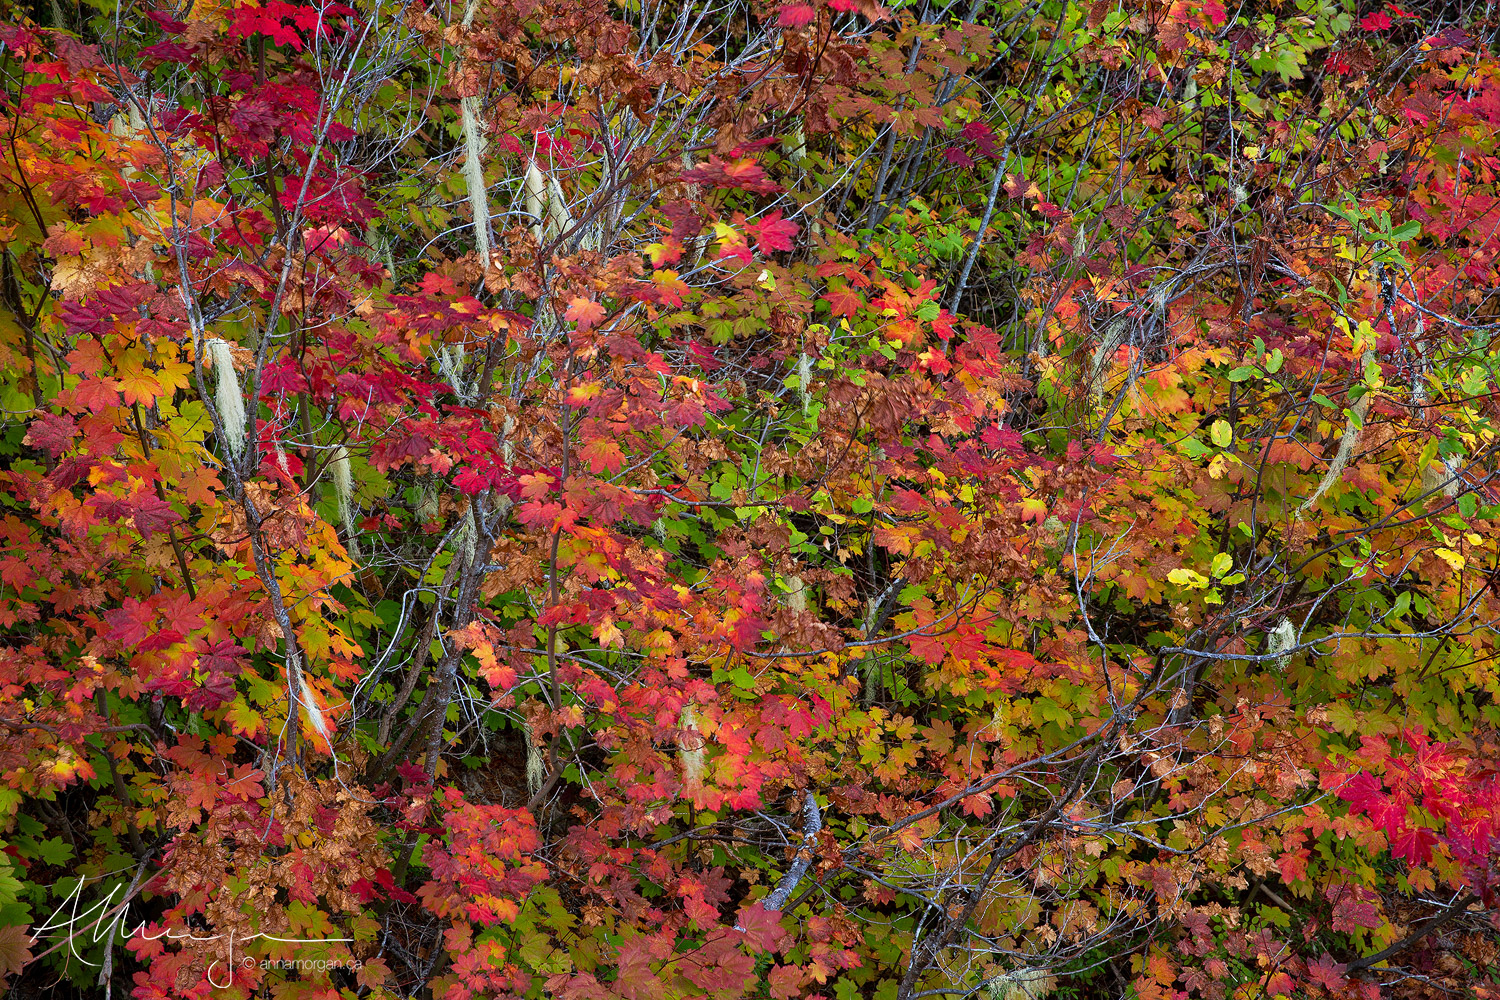 Lichens cascade from vine maples in full autumn color